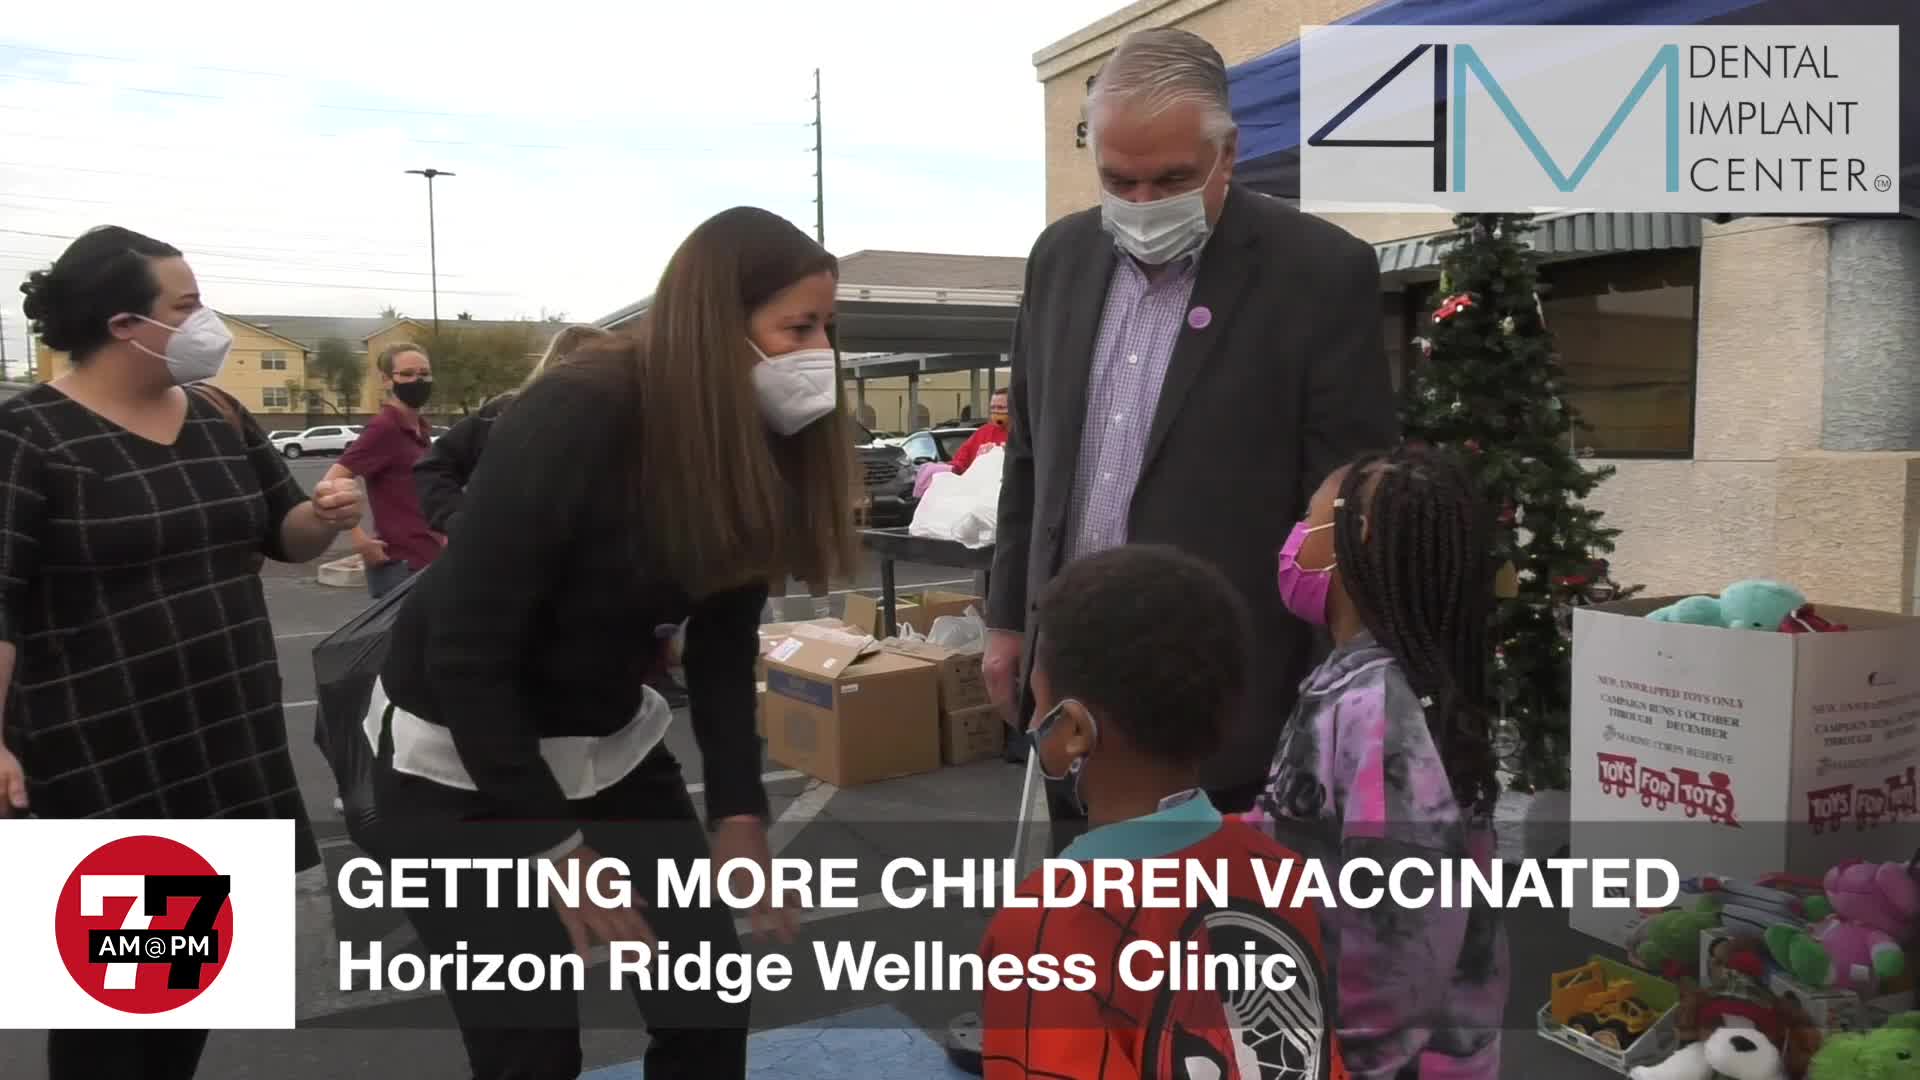 7@7PM Getting More Children Vaccinated